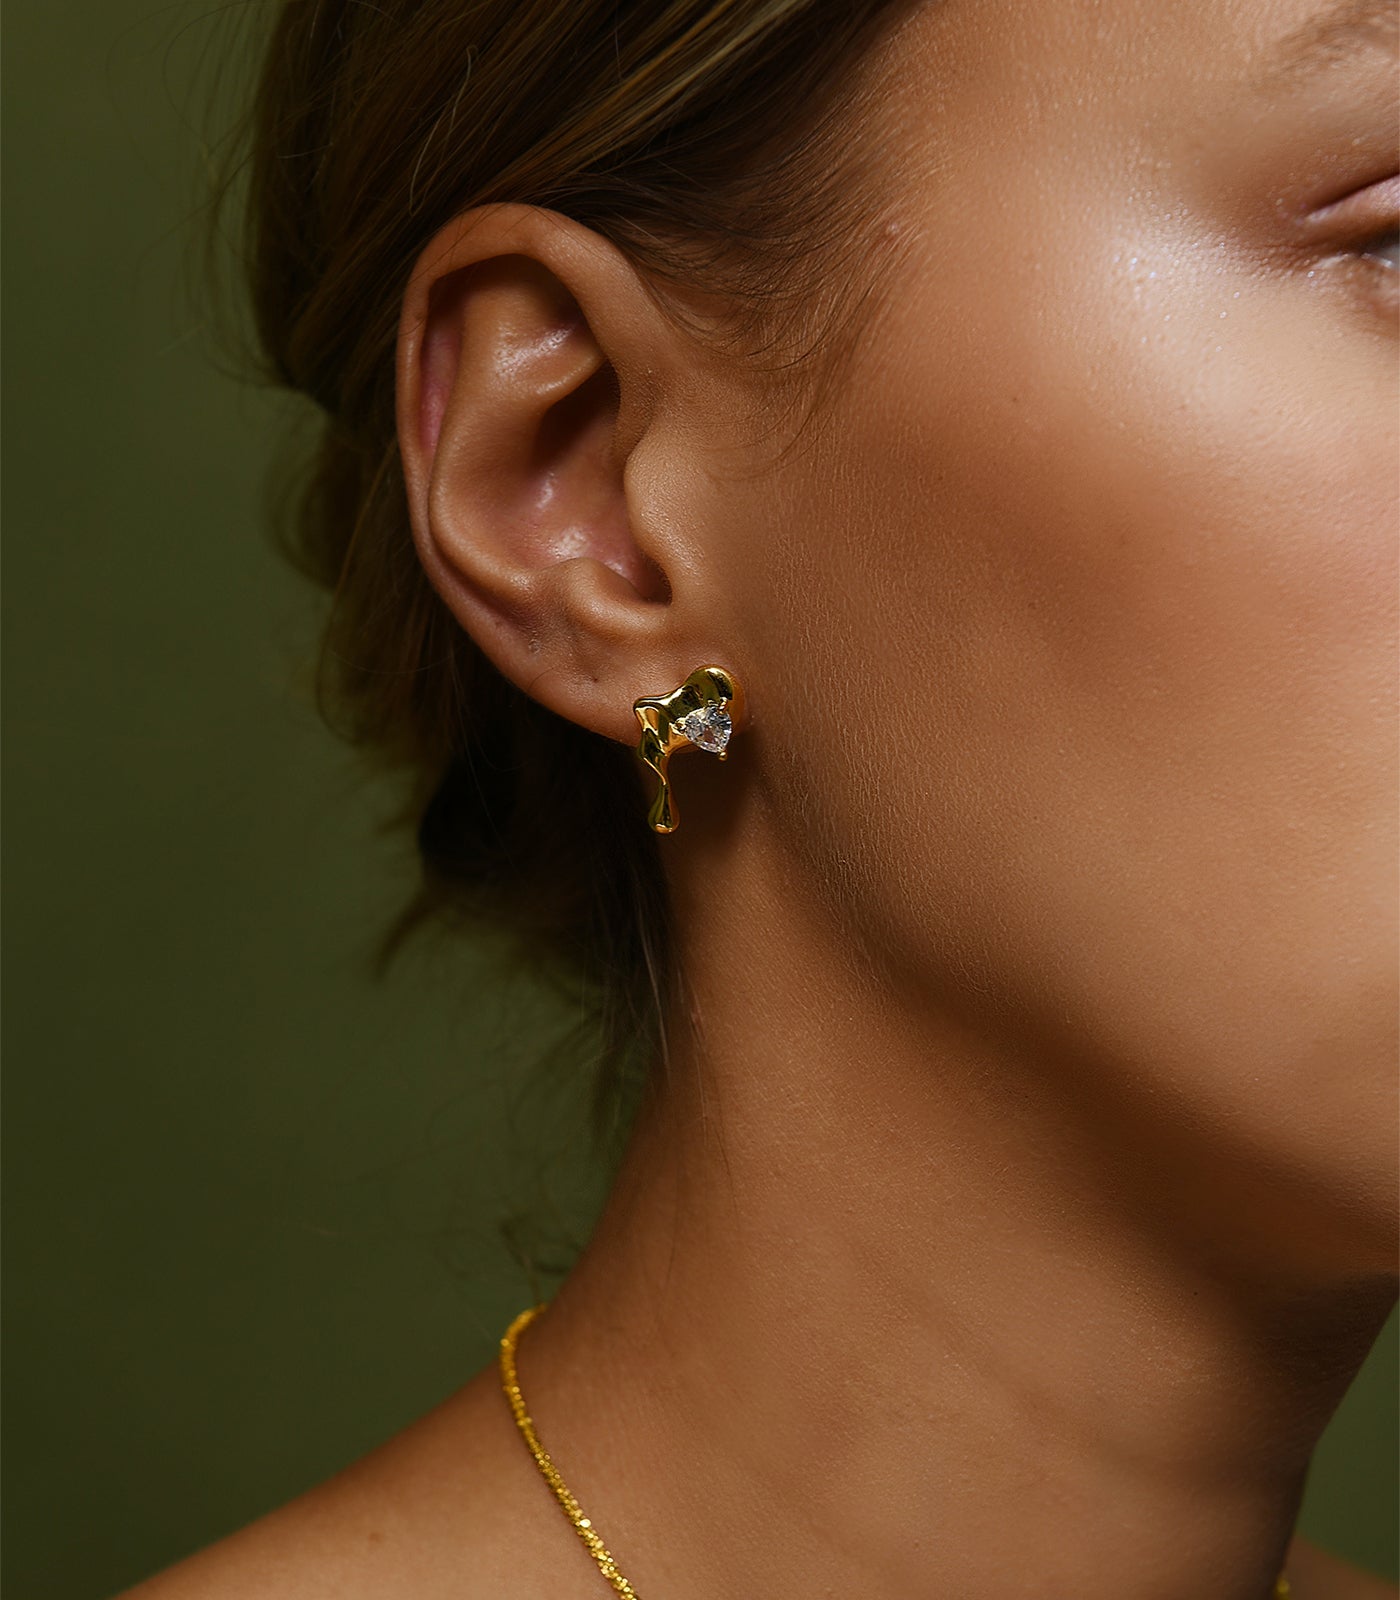 A model wears a pair of gold vermeil, stud earrings which resemble a droplet of water.